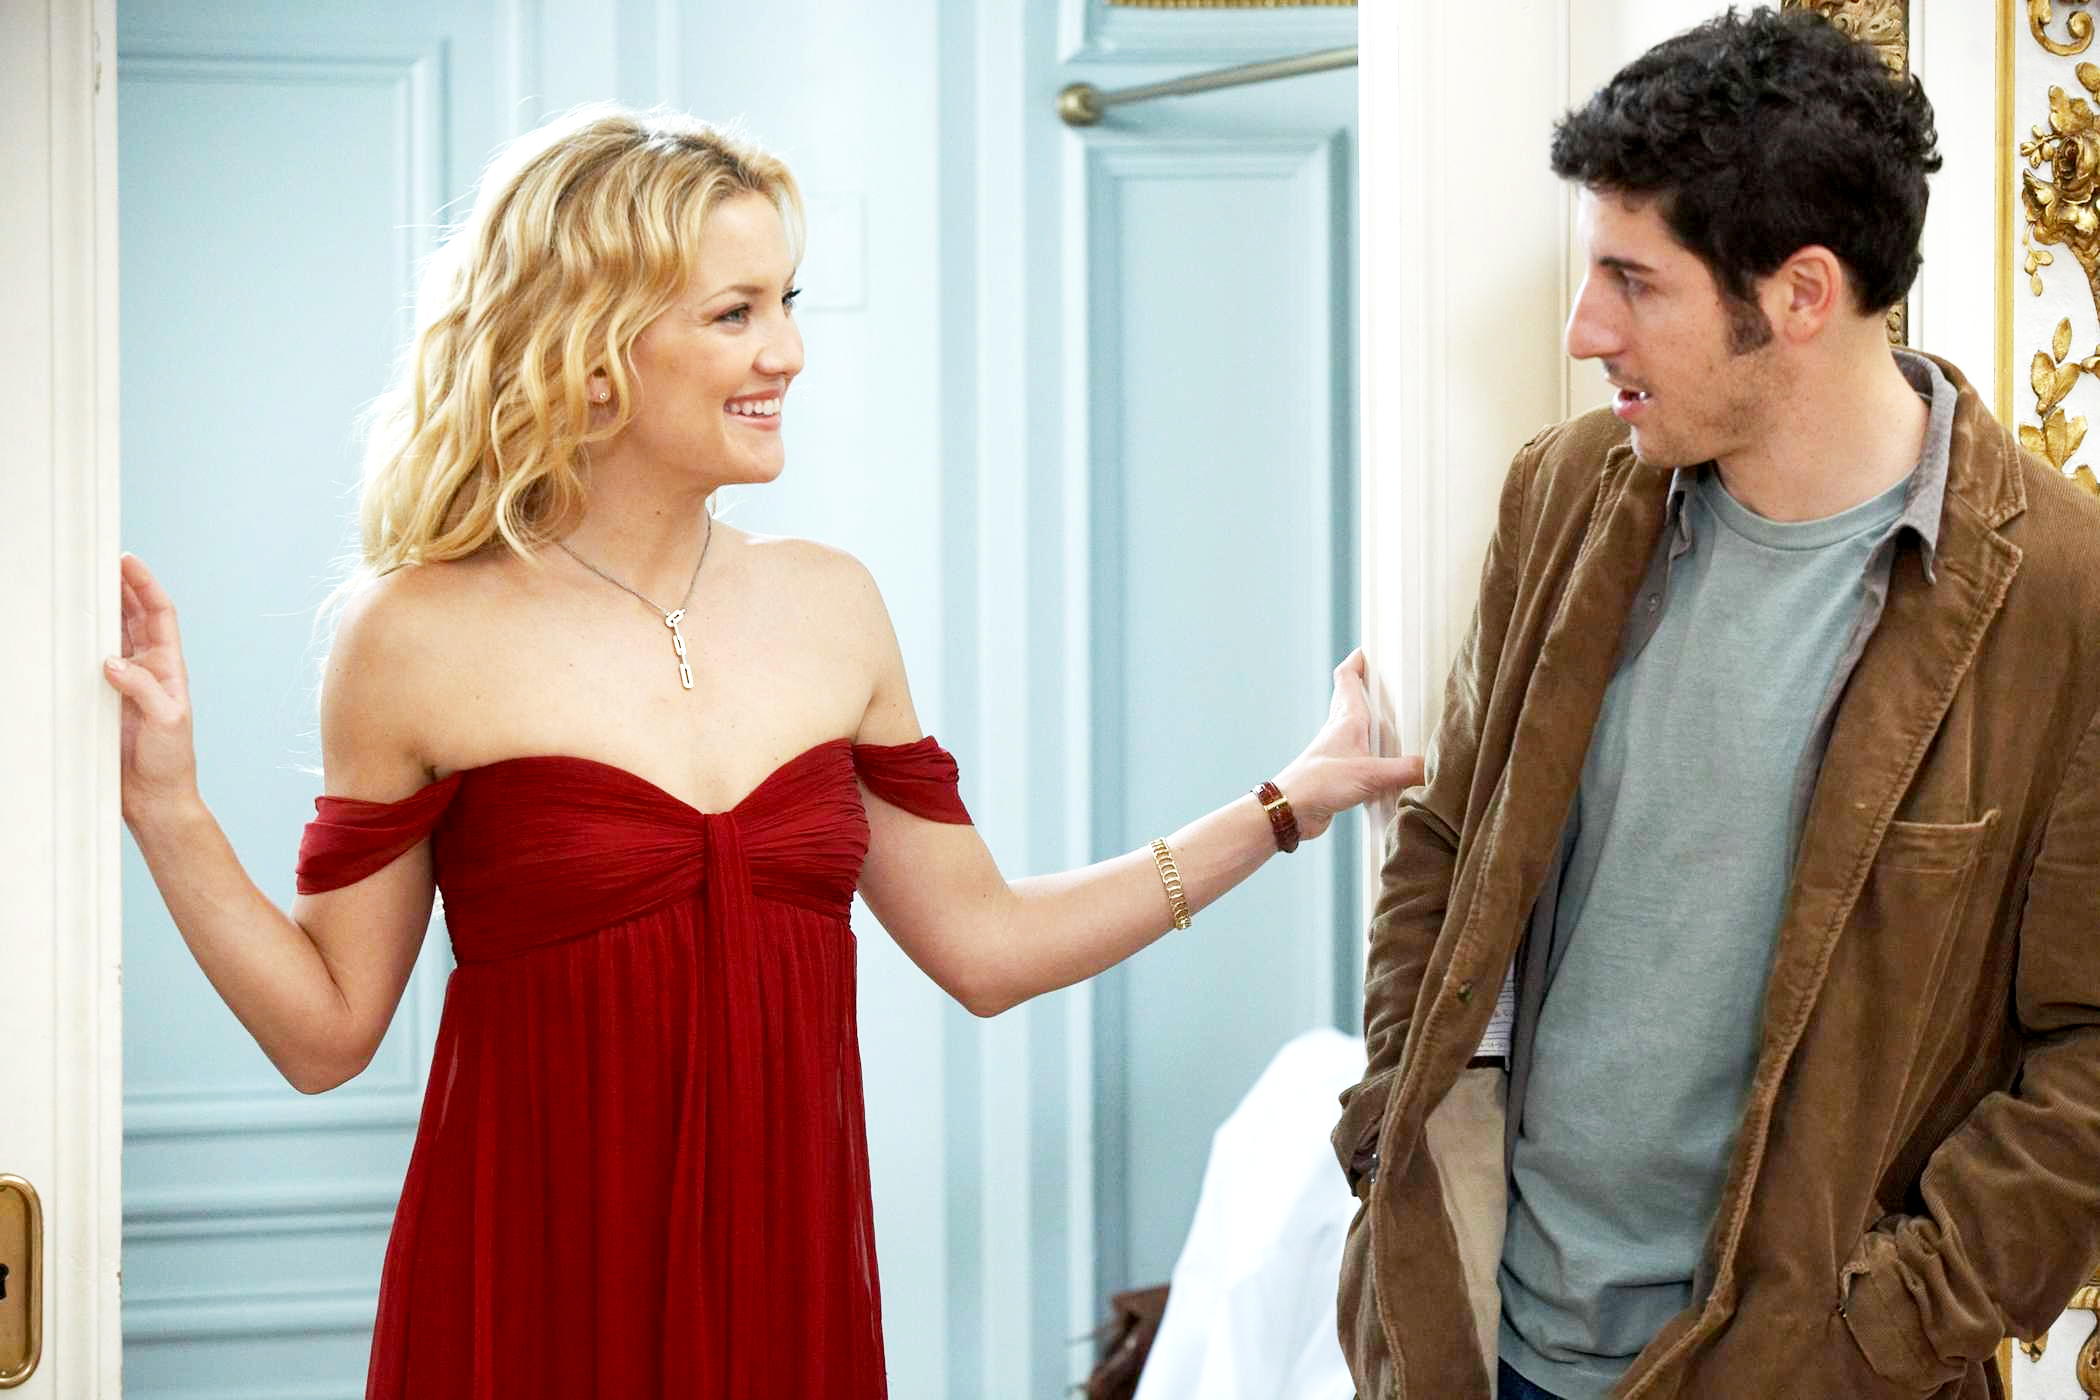 Kate Hudson stars as Alexis and Jason Biggs stars as Dustin in Lions Gate Films' My Best Friend's Girl (2008). Photo credit by Claire Folger.